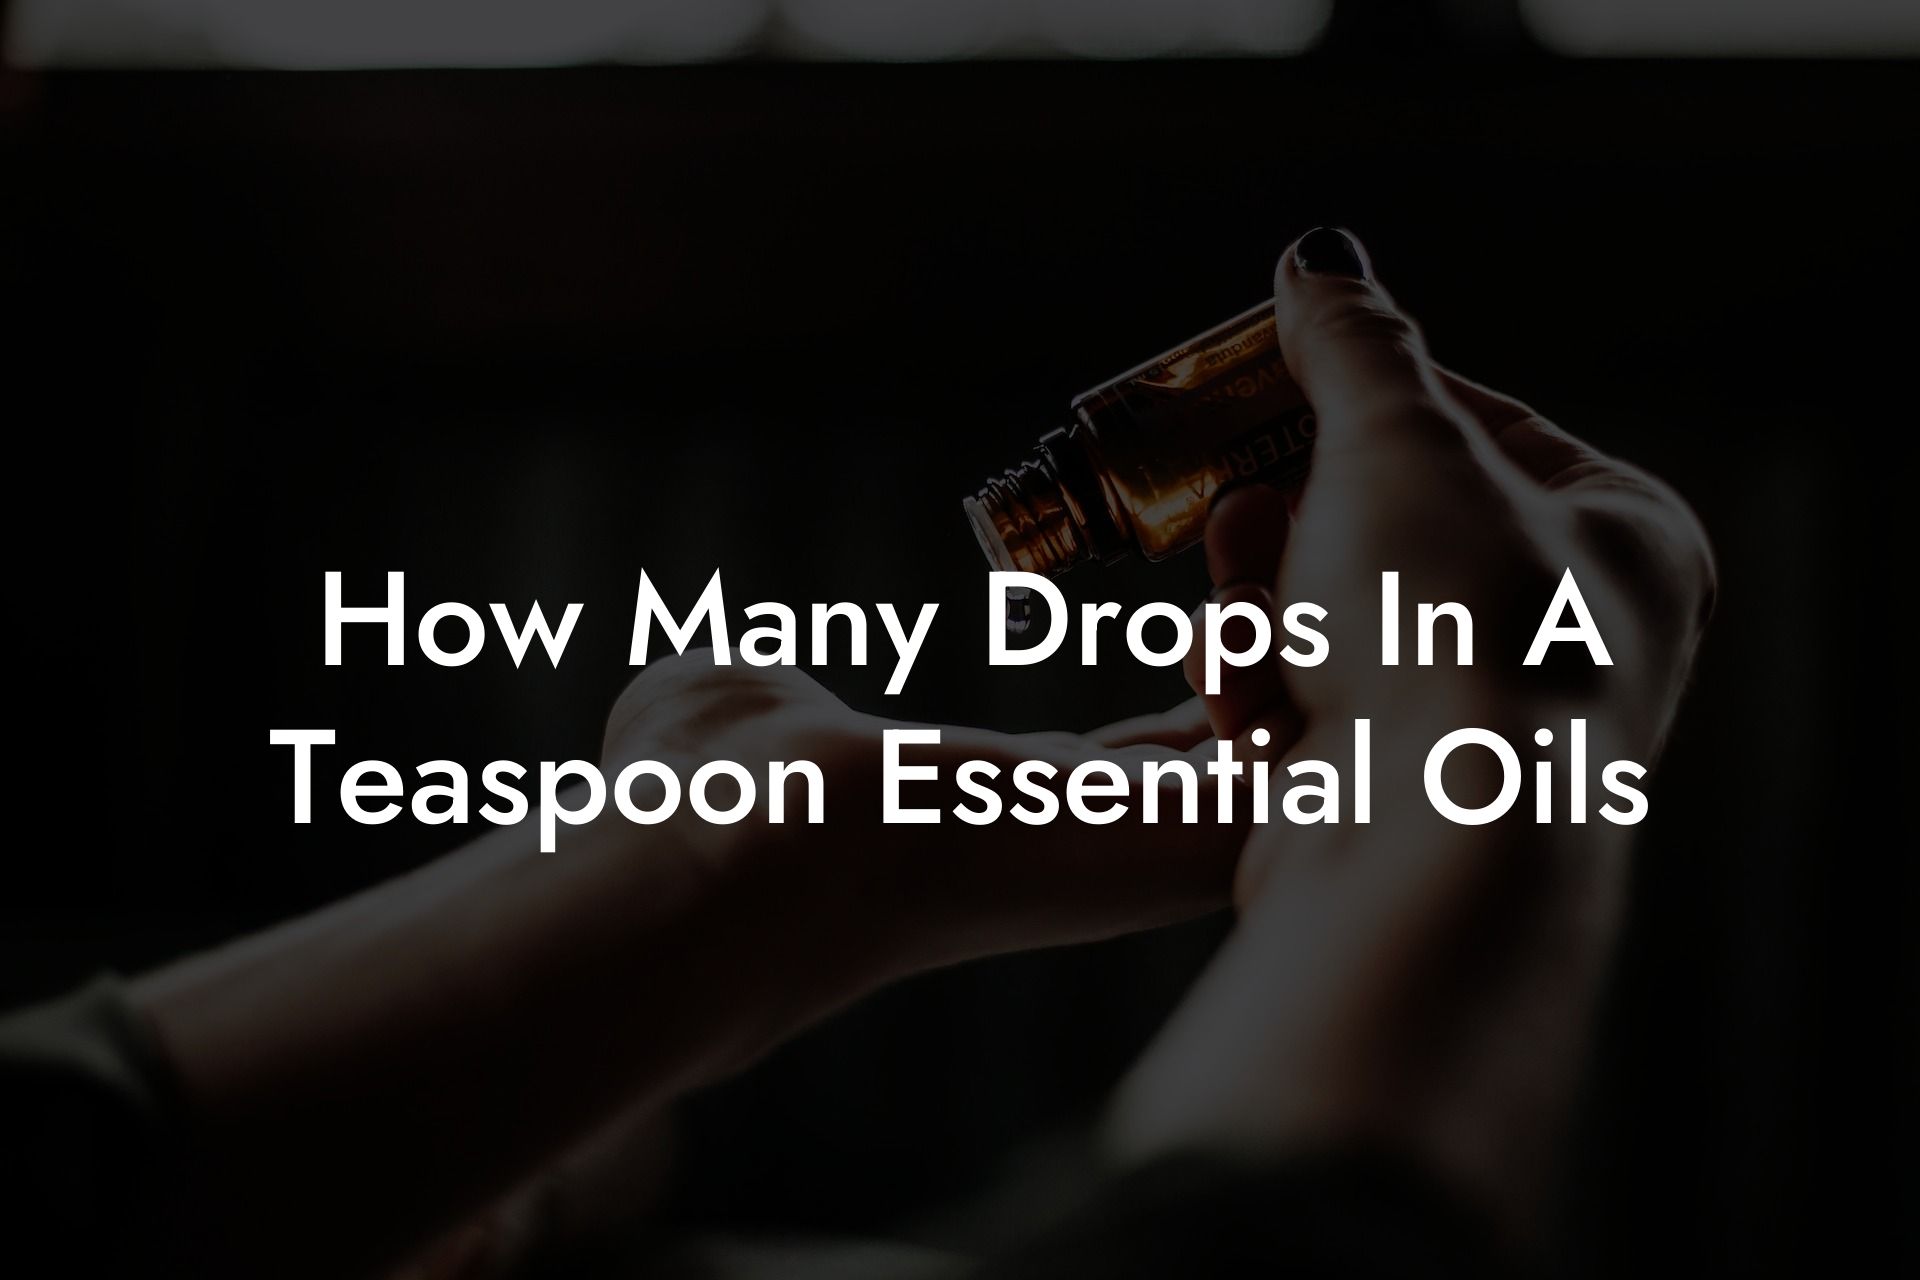 How Many Drops In A Teaspoon Essential Oils